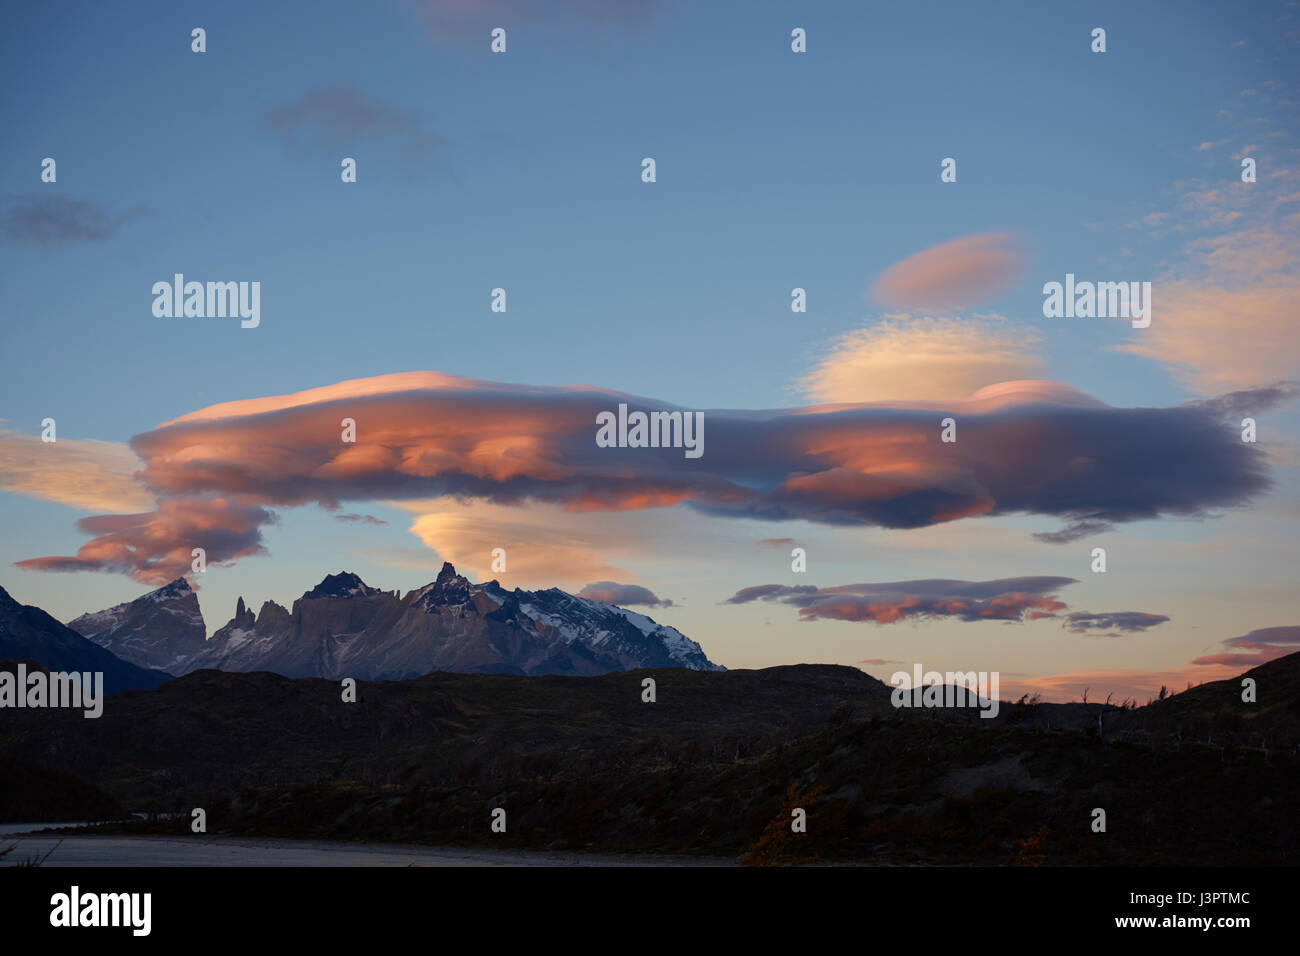 Lenticular clouds at dusk over the mountains of Torres del Paine National Park in Patagonia, Chile Stock Photo